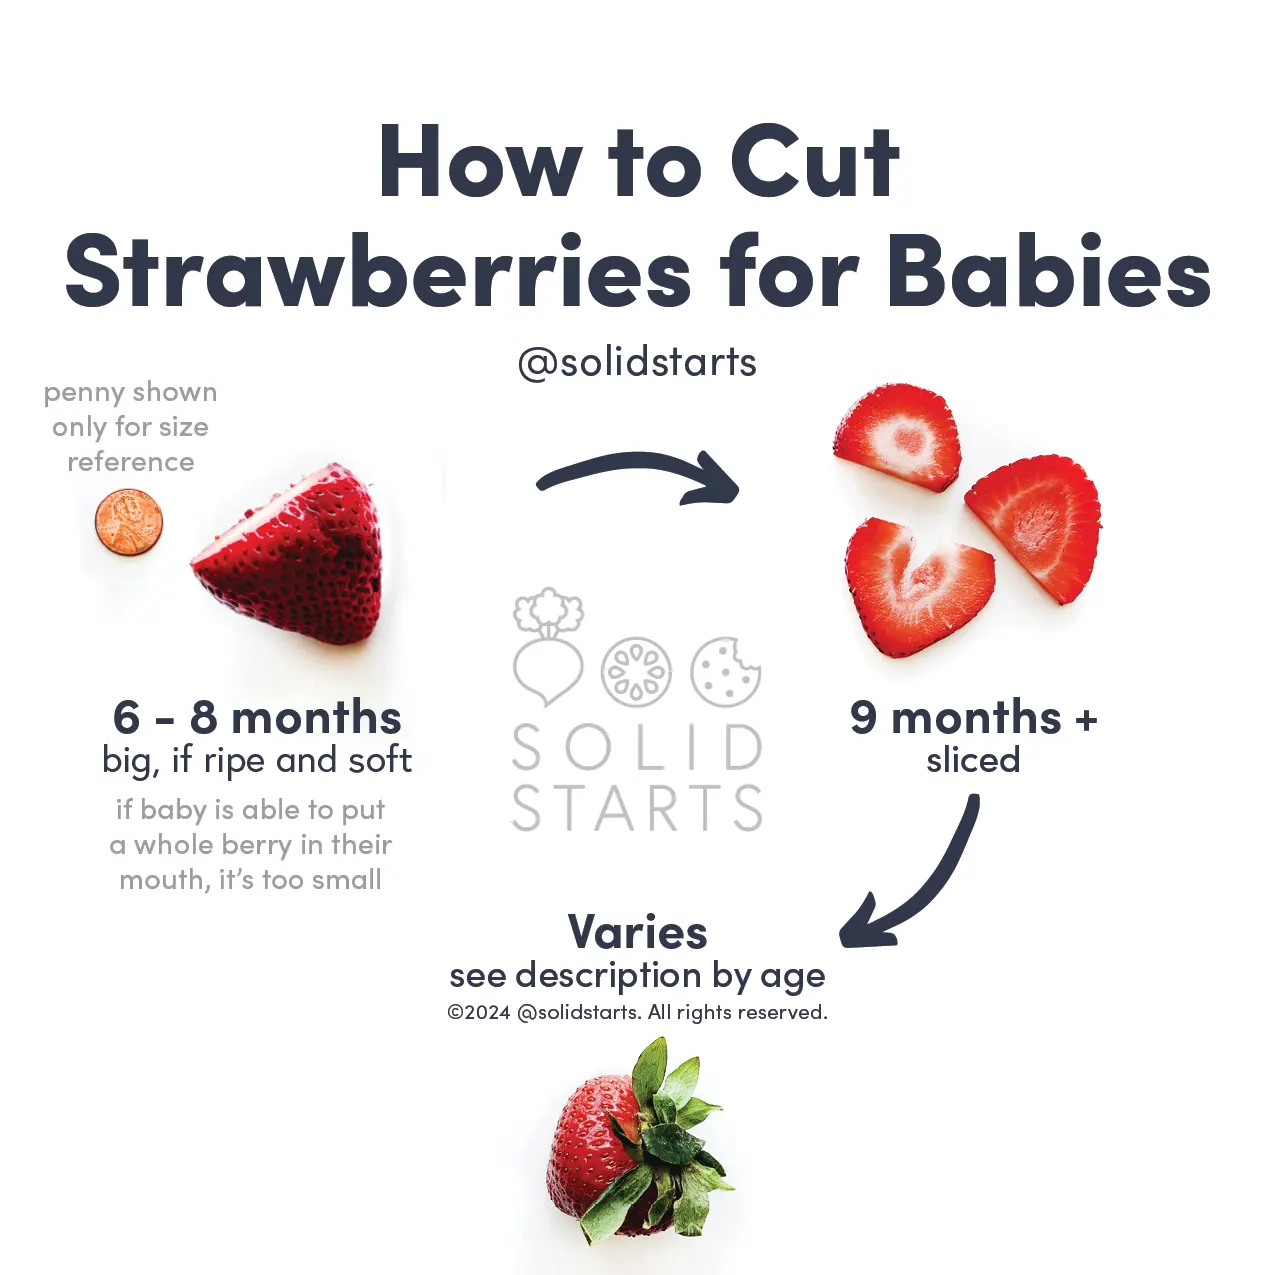 A Solid Starts infographic showing how to cut strawberries by baby's age, showing large berries for 6 to 9 mos, sliced berries for 9 mos+ and whole with the stem (optional) for 12 mos+, Berries must be soft and ripe and if serving whole, should be large e